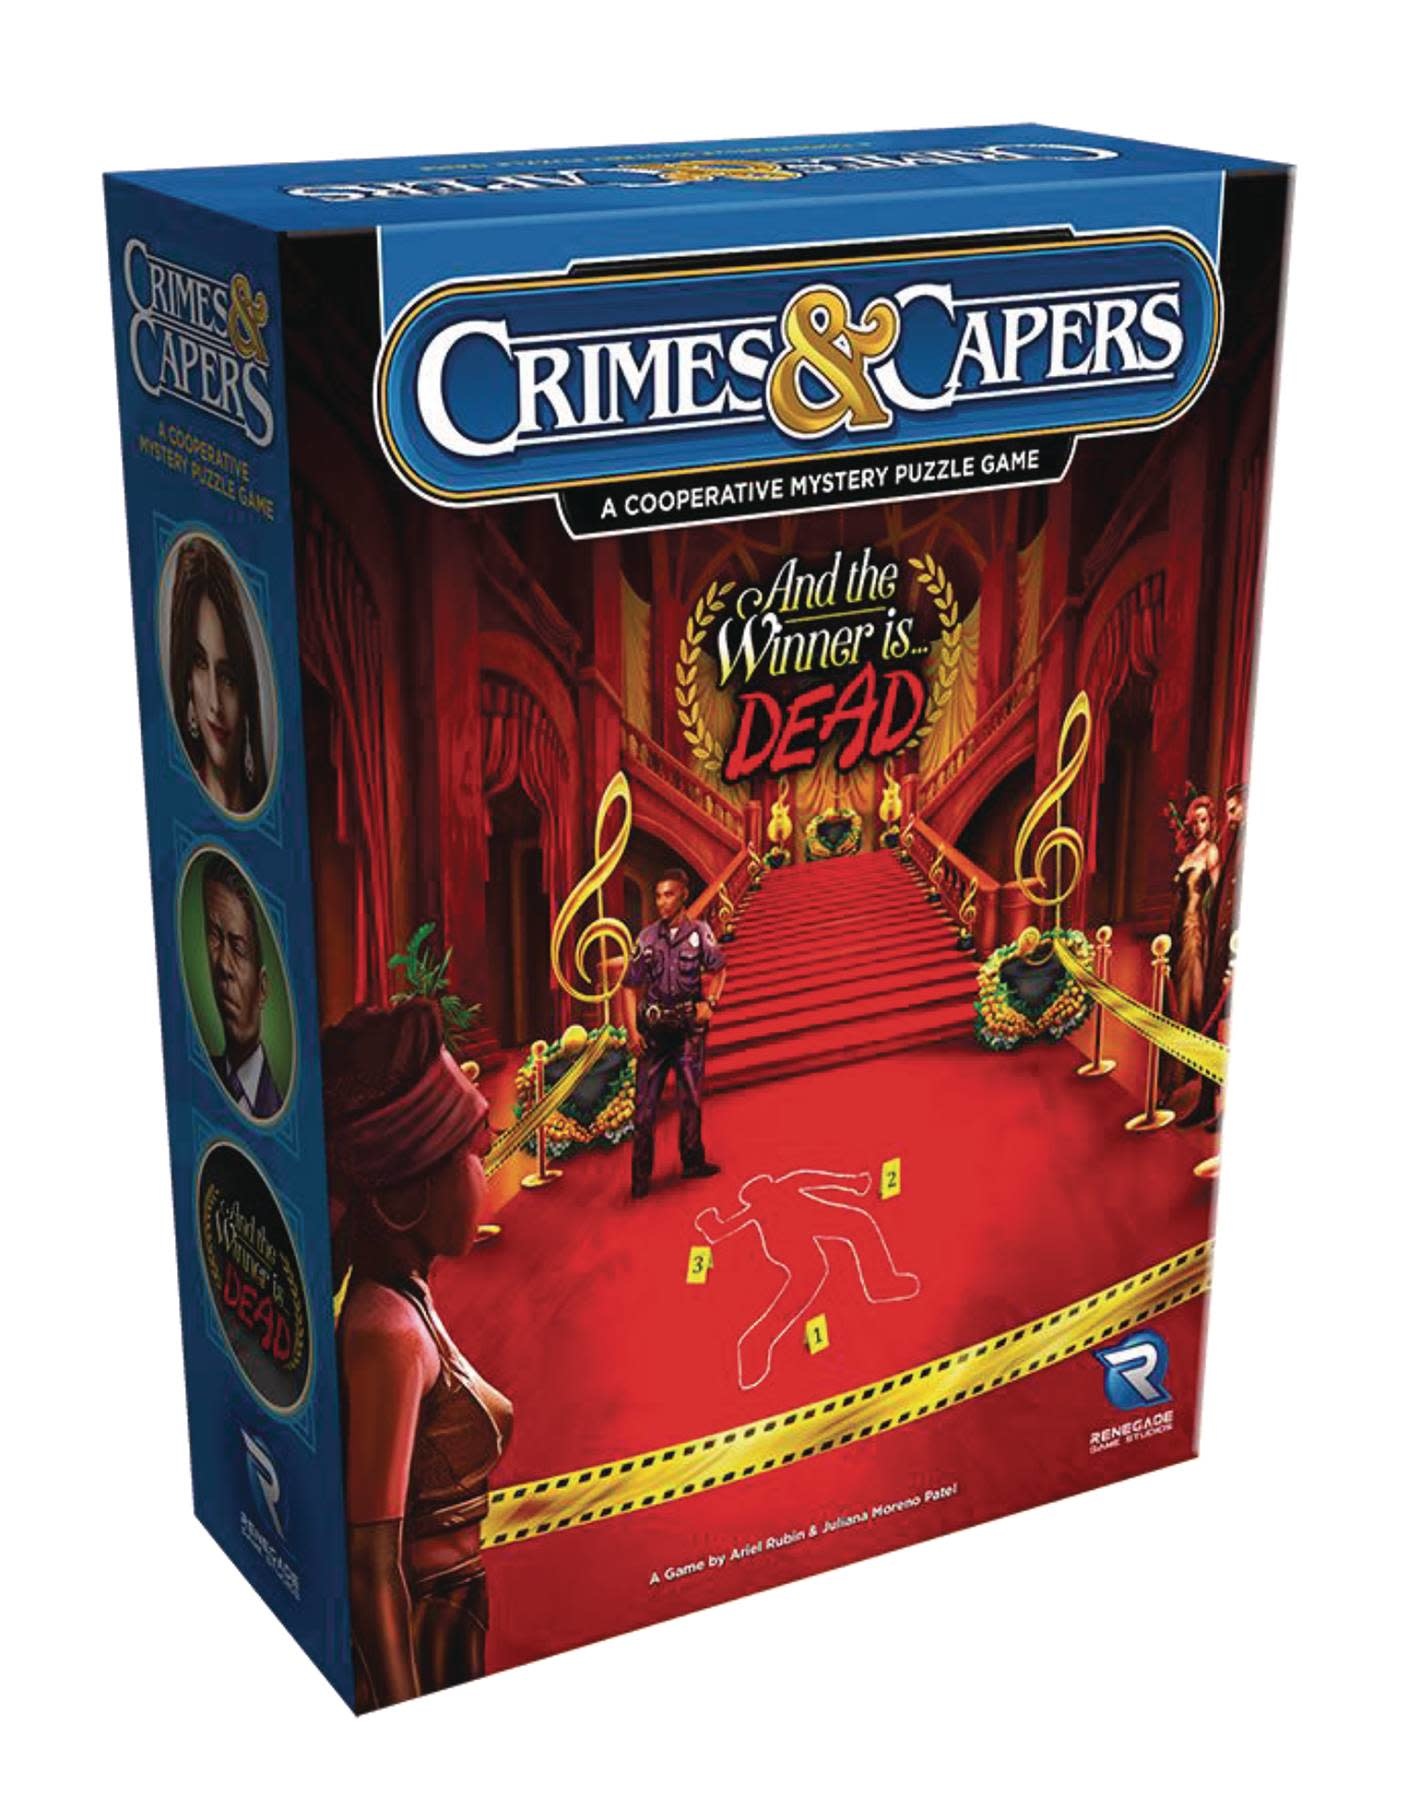 Renegade Game Studio Crimes & Capers Winner Is Dead Coop Mystery Puzzle Game